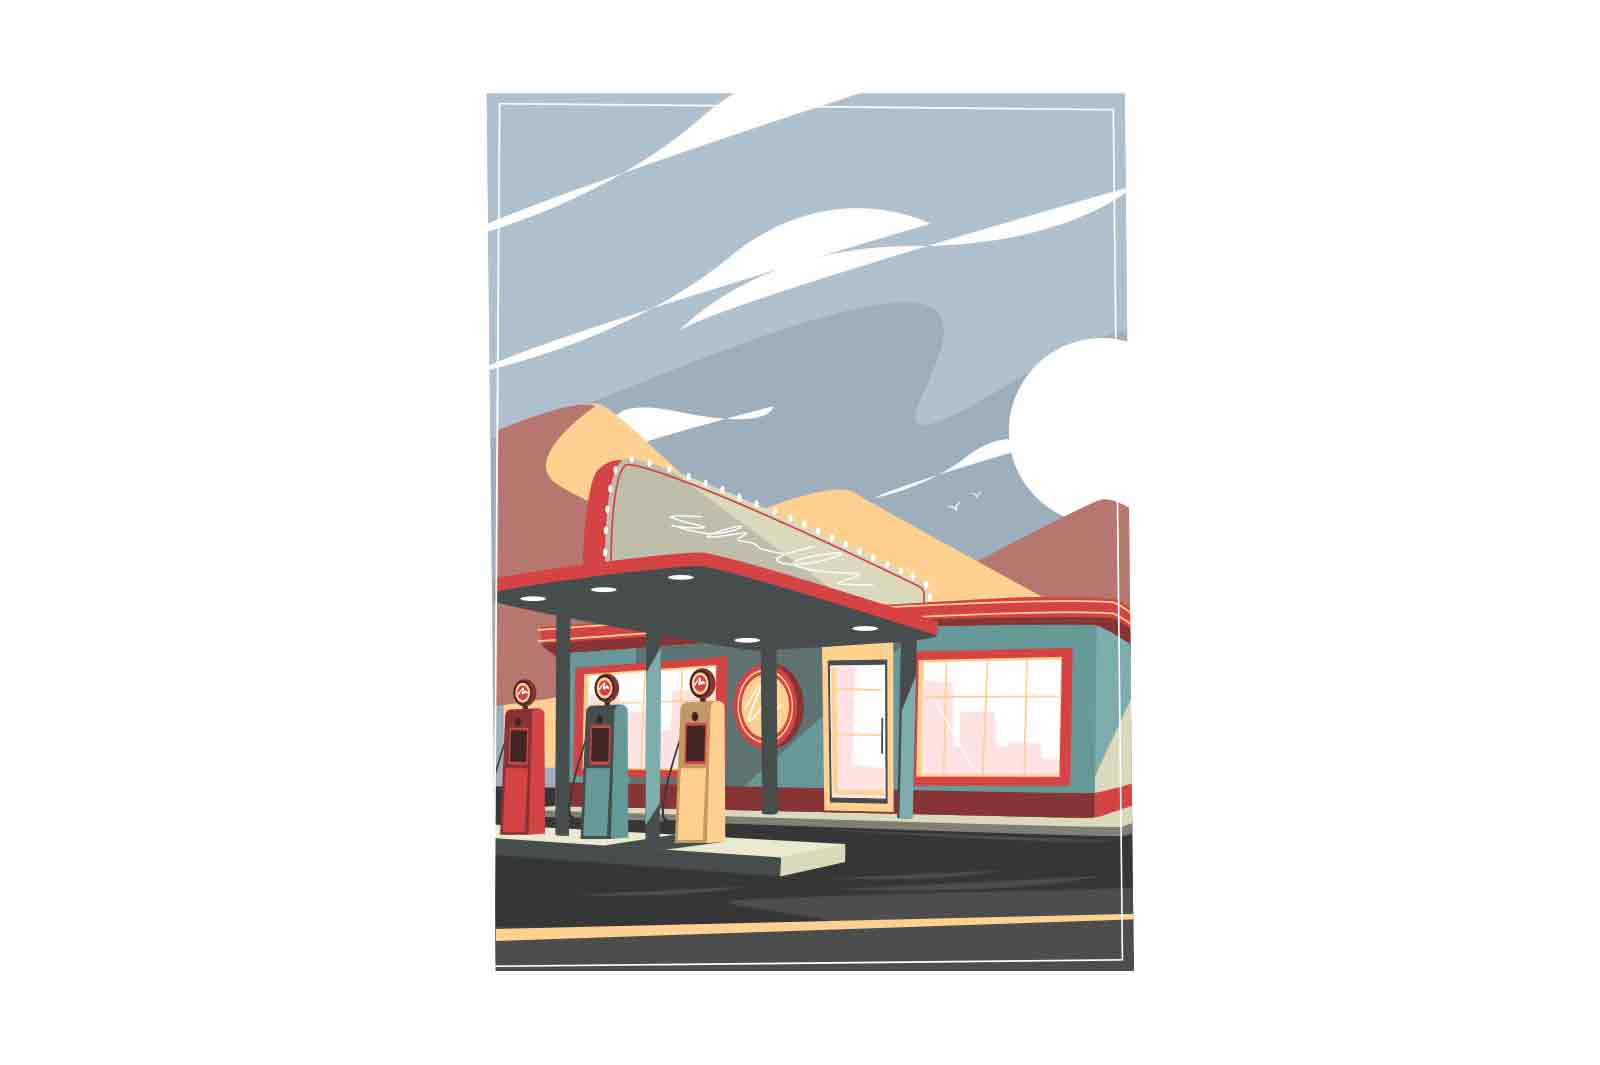 Gas station for refueling car vector illustration. Fuel selling for urban vehicle, gas refill flat style. Automobile filling station concept